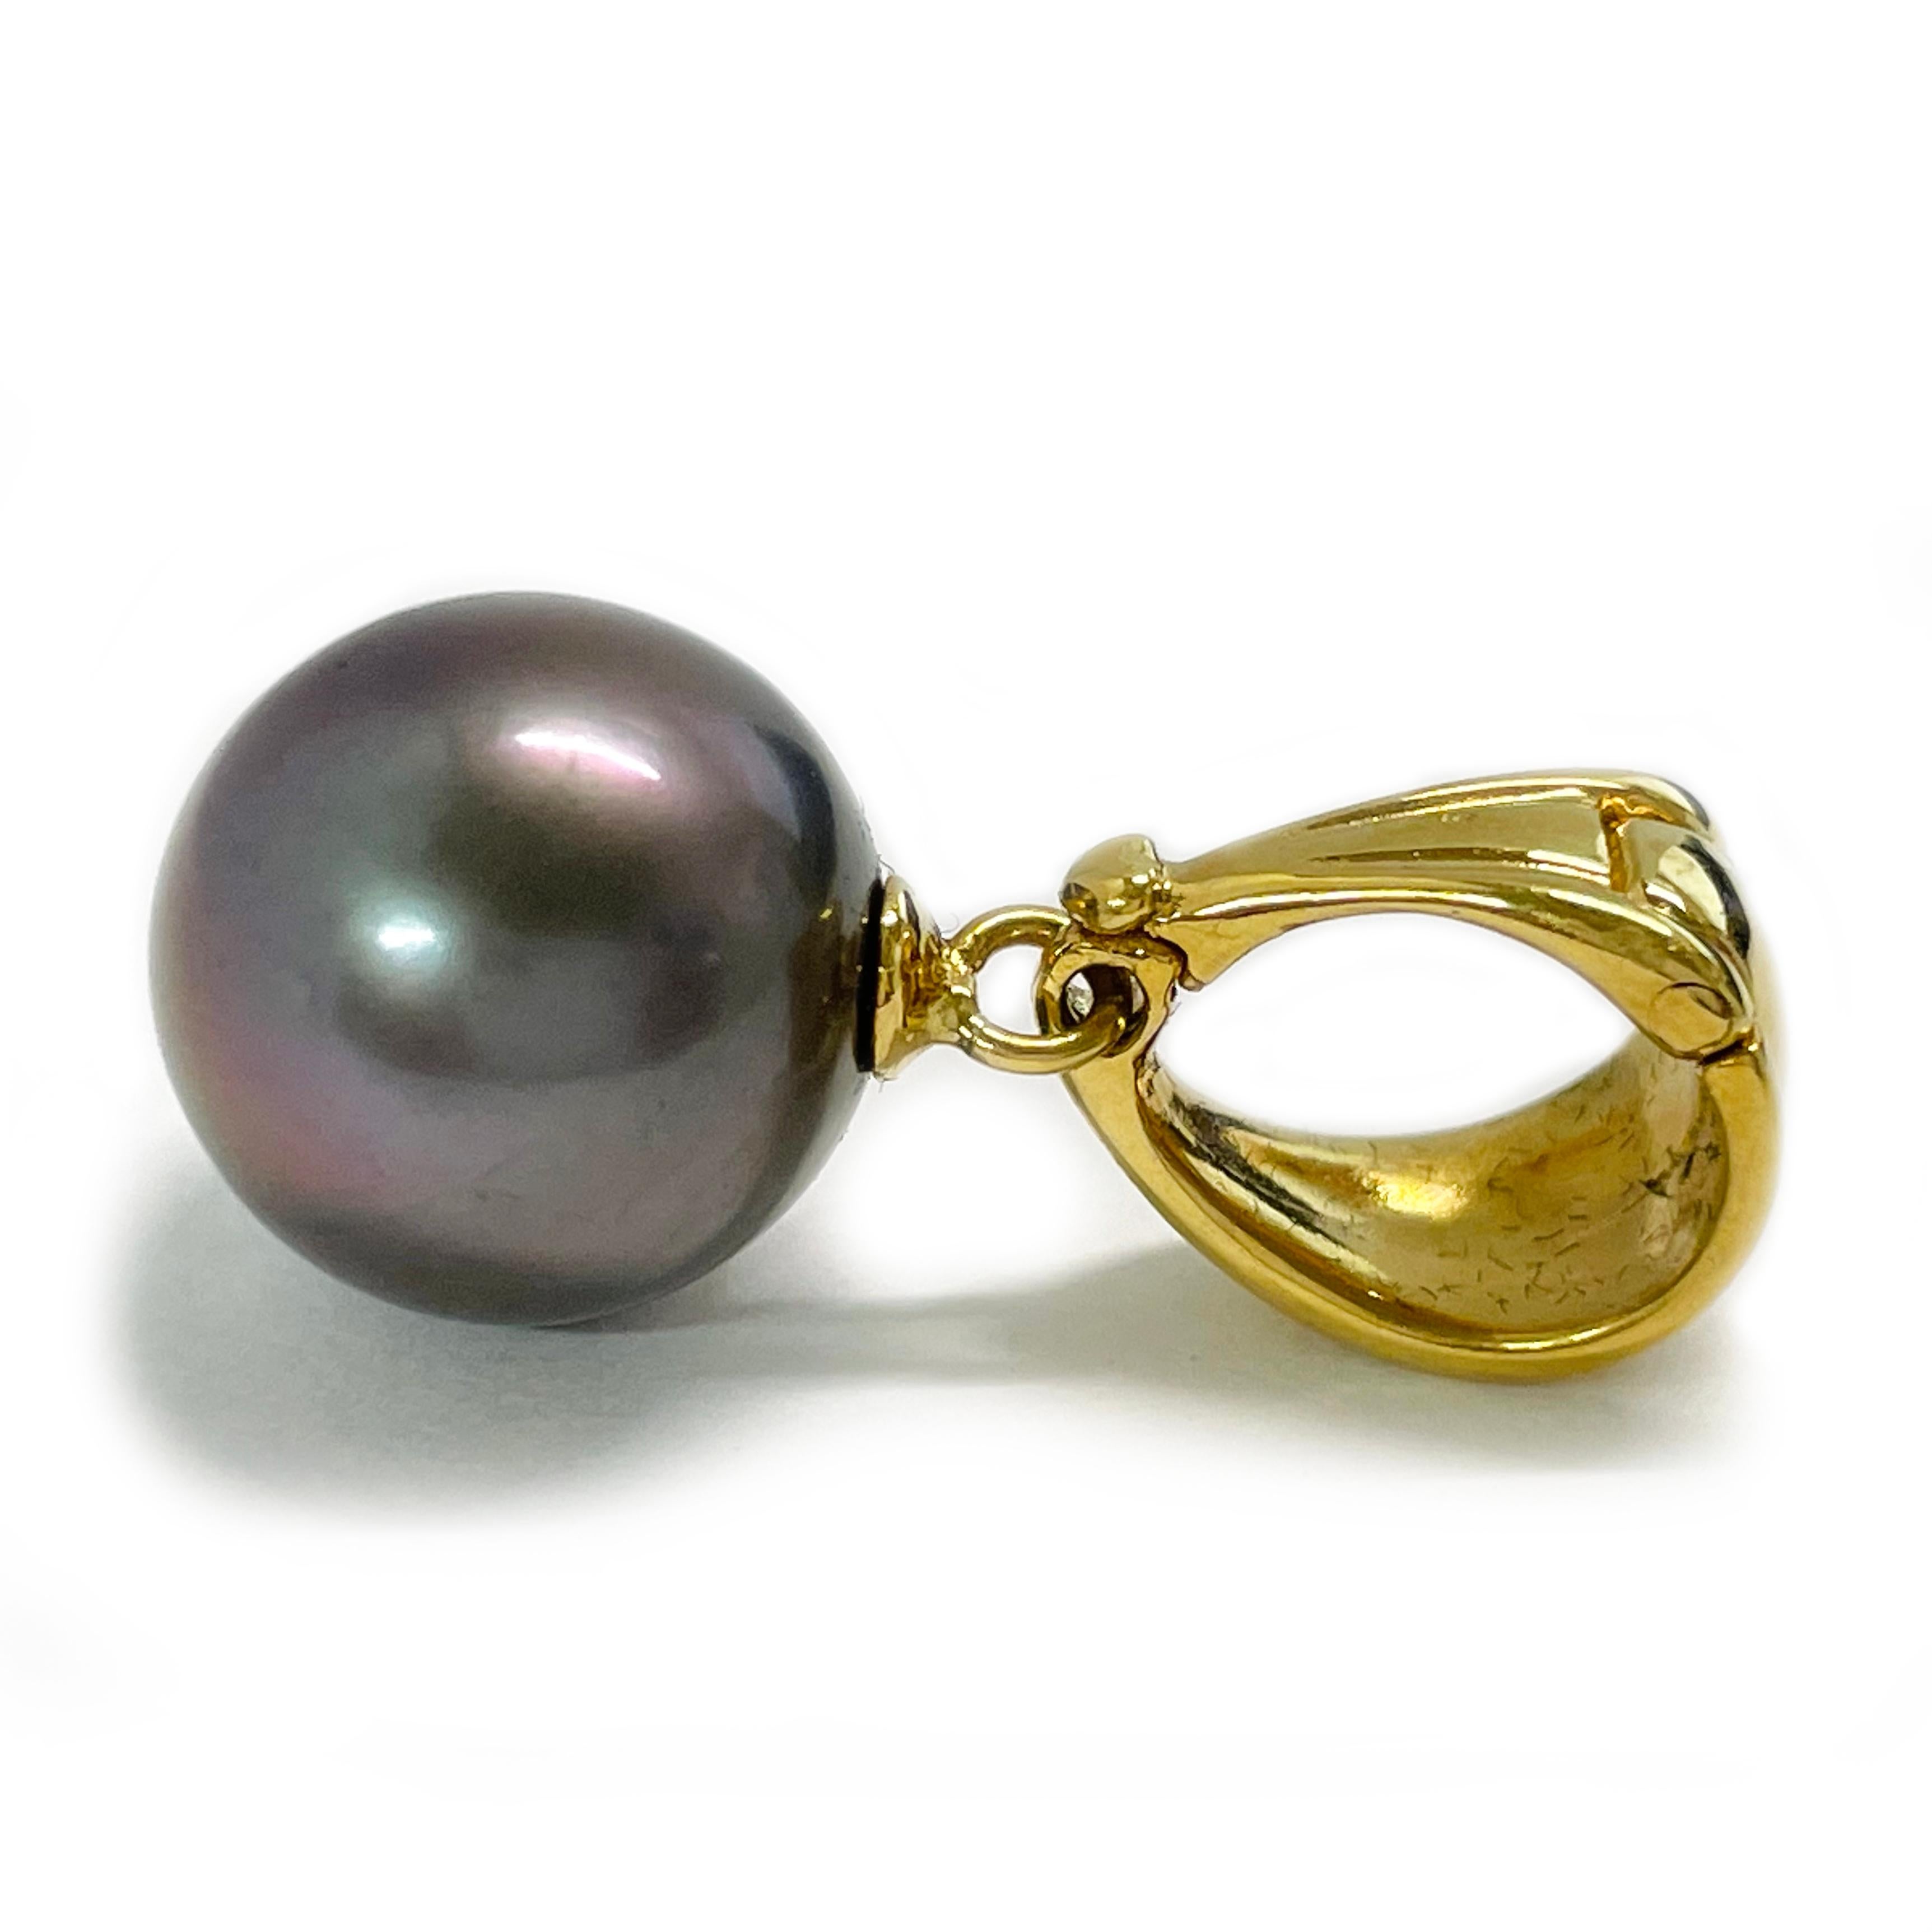 18 Karat Yellow Gold Black Tahitian Pearl Enhancer Pendant. The pearl measures 12.5mm and has good shape, luster with only minor blemishes. The pendant has an enhancer bail. The height of the pendant including bail is 26.3mm. The total weight of the